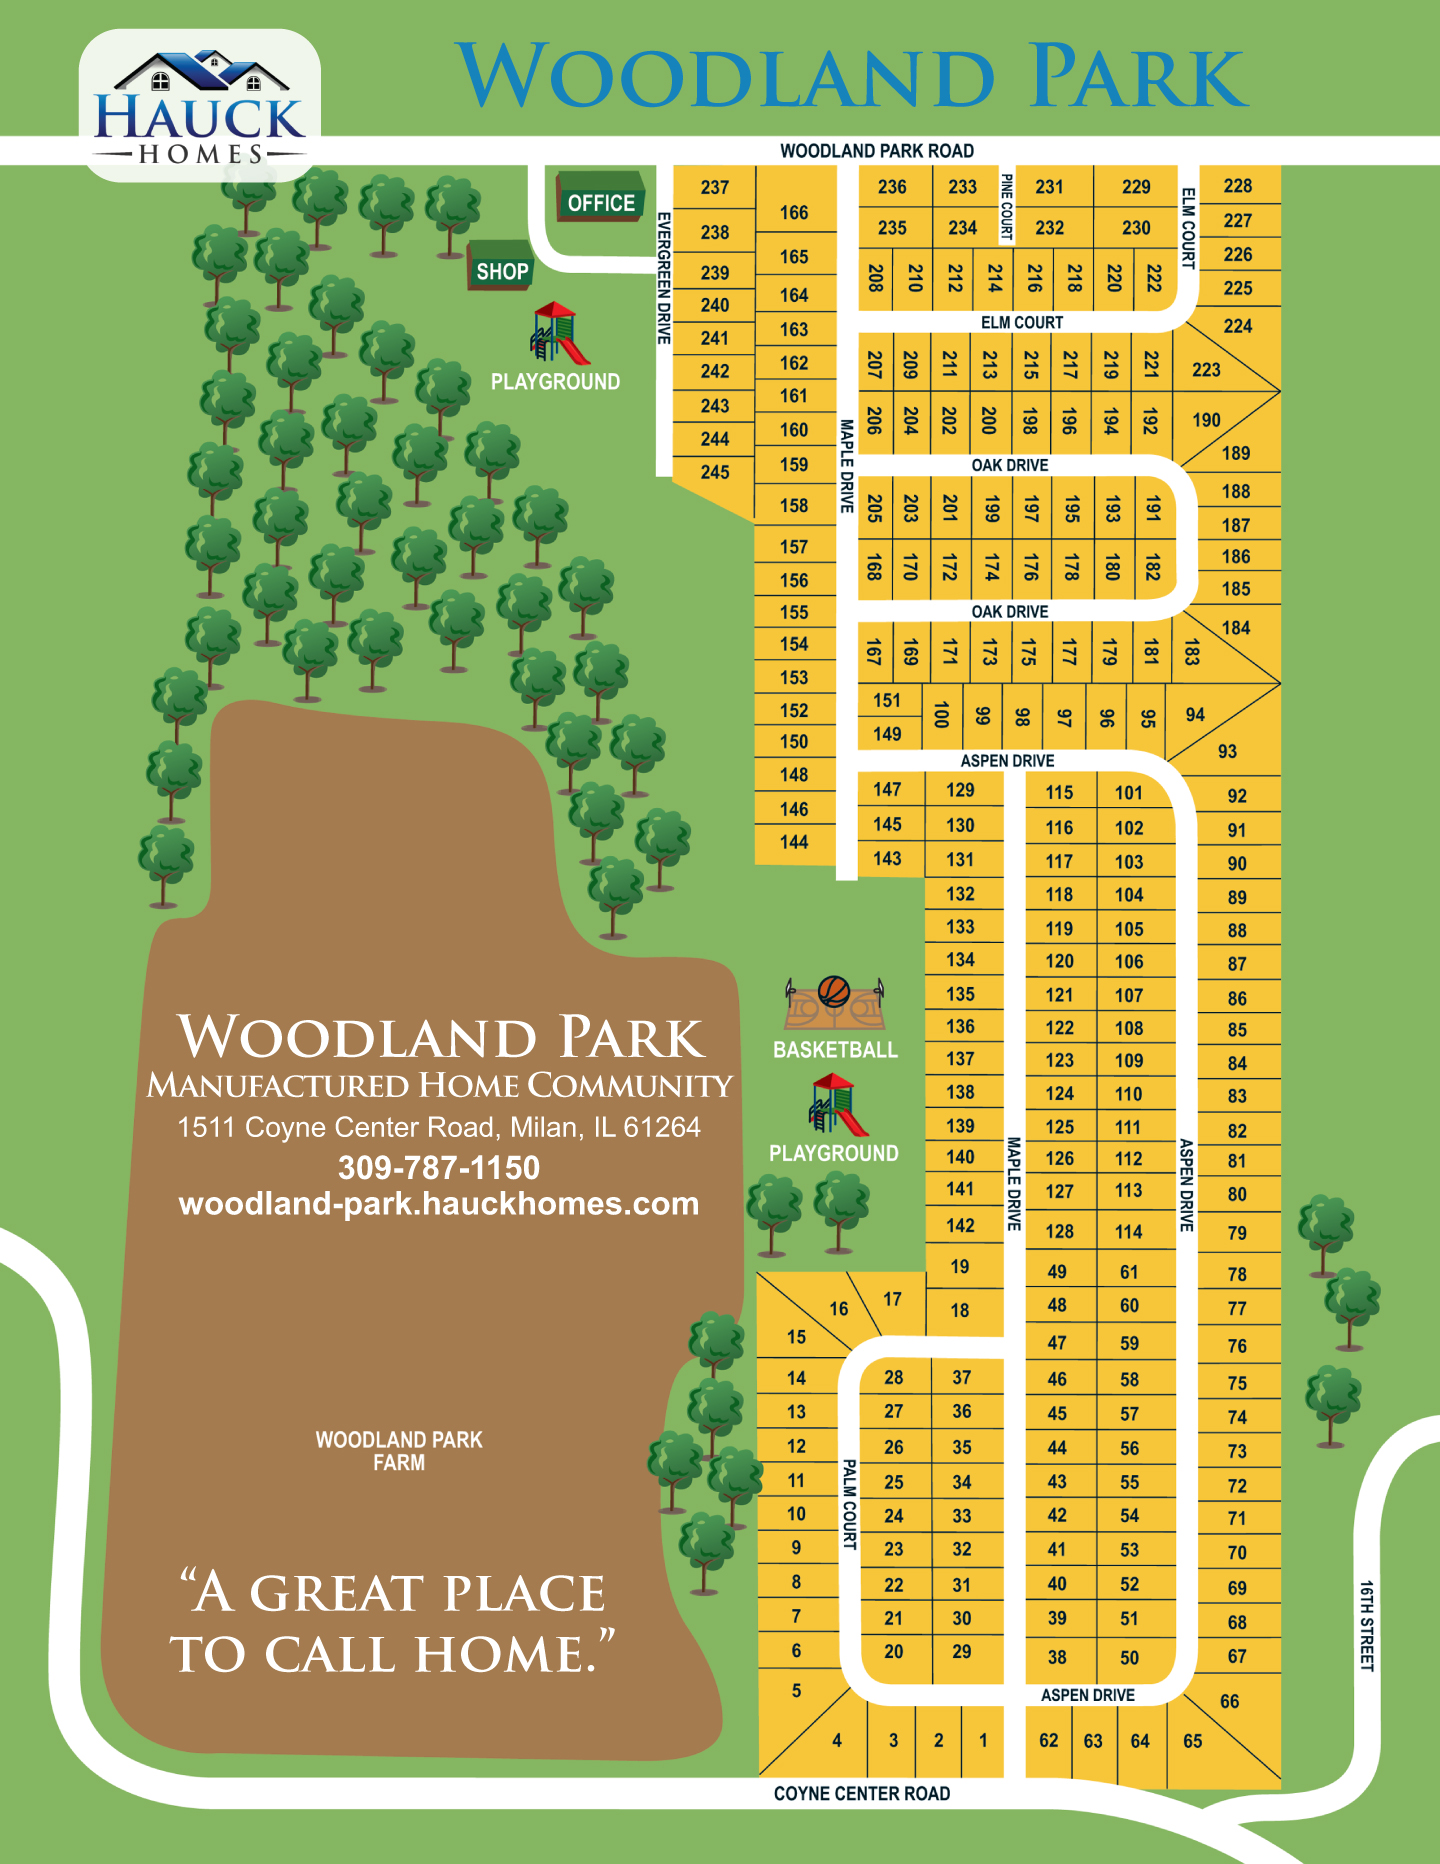 Site map of Woodland Park